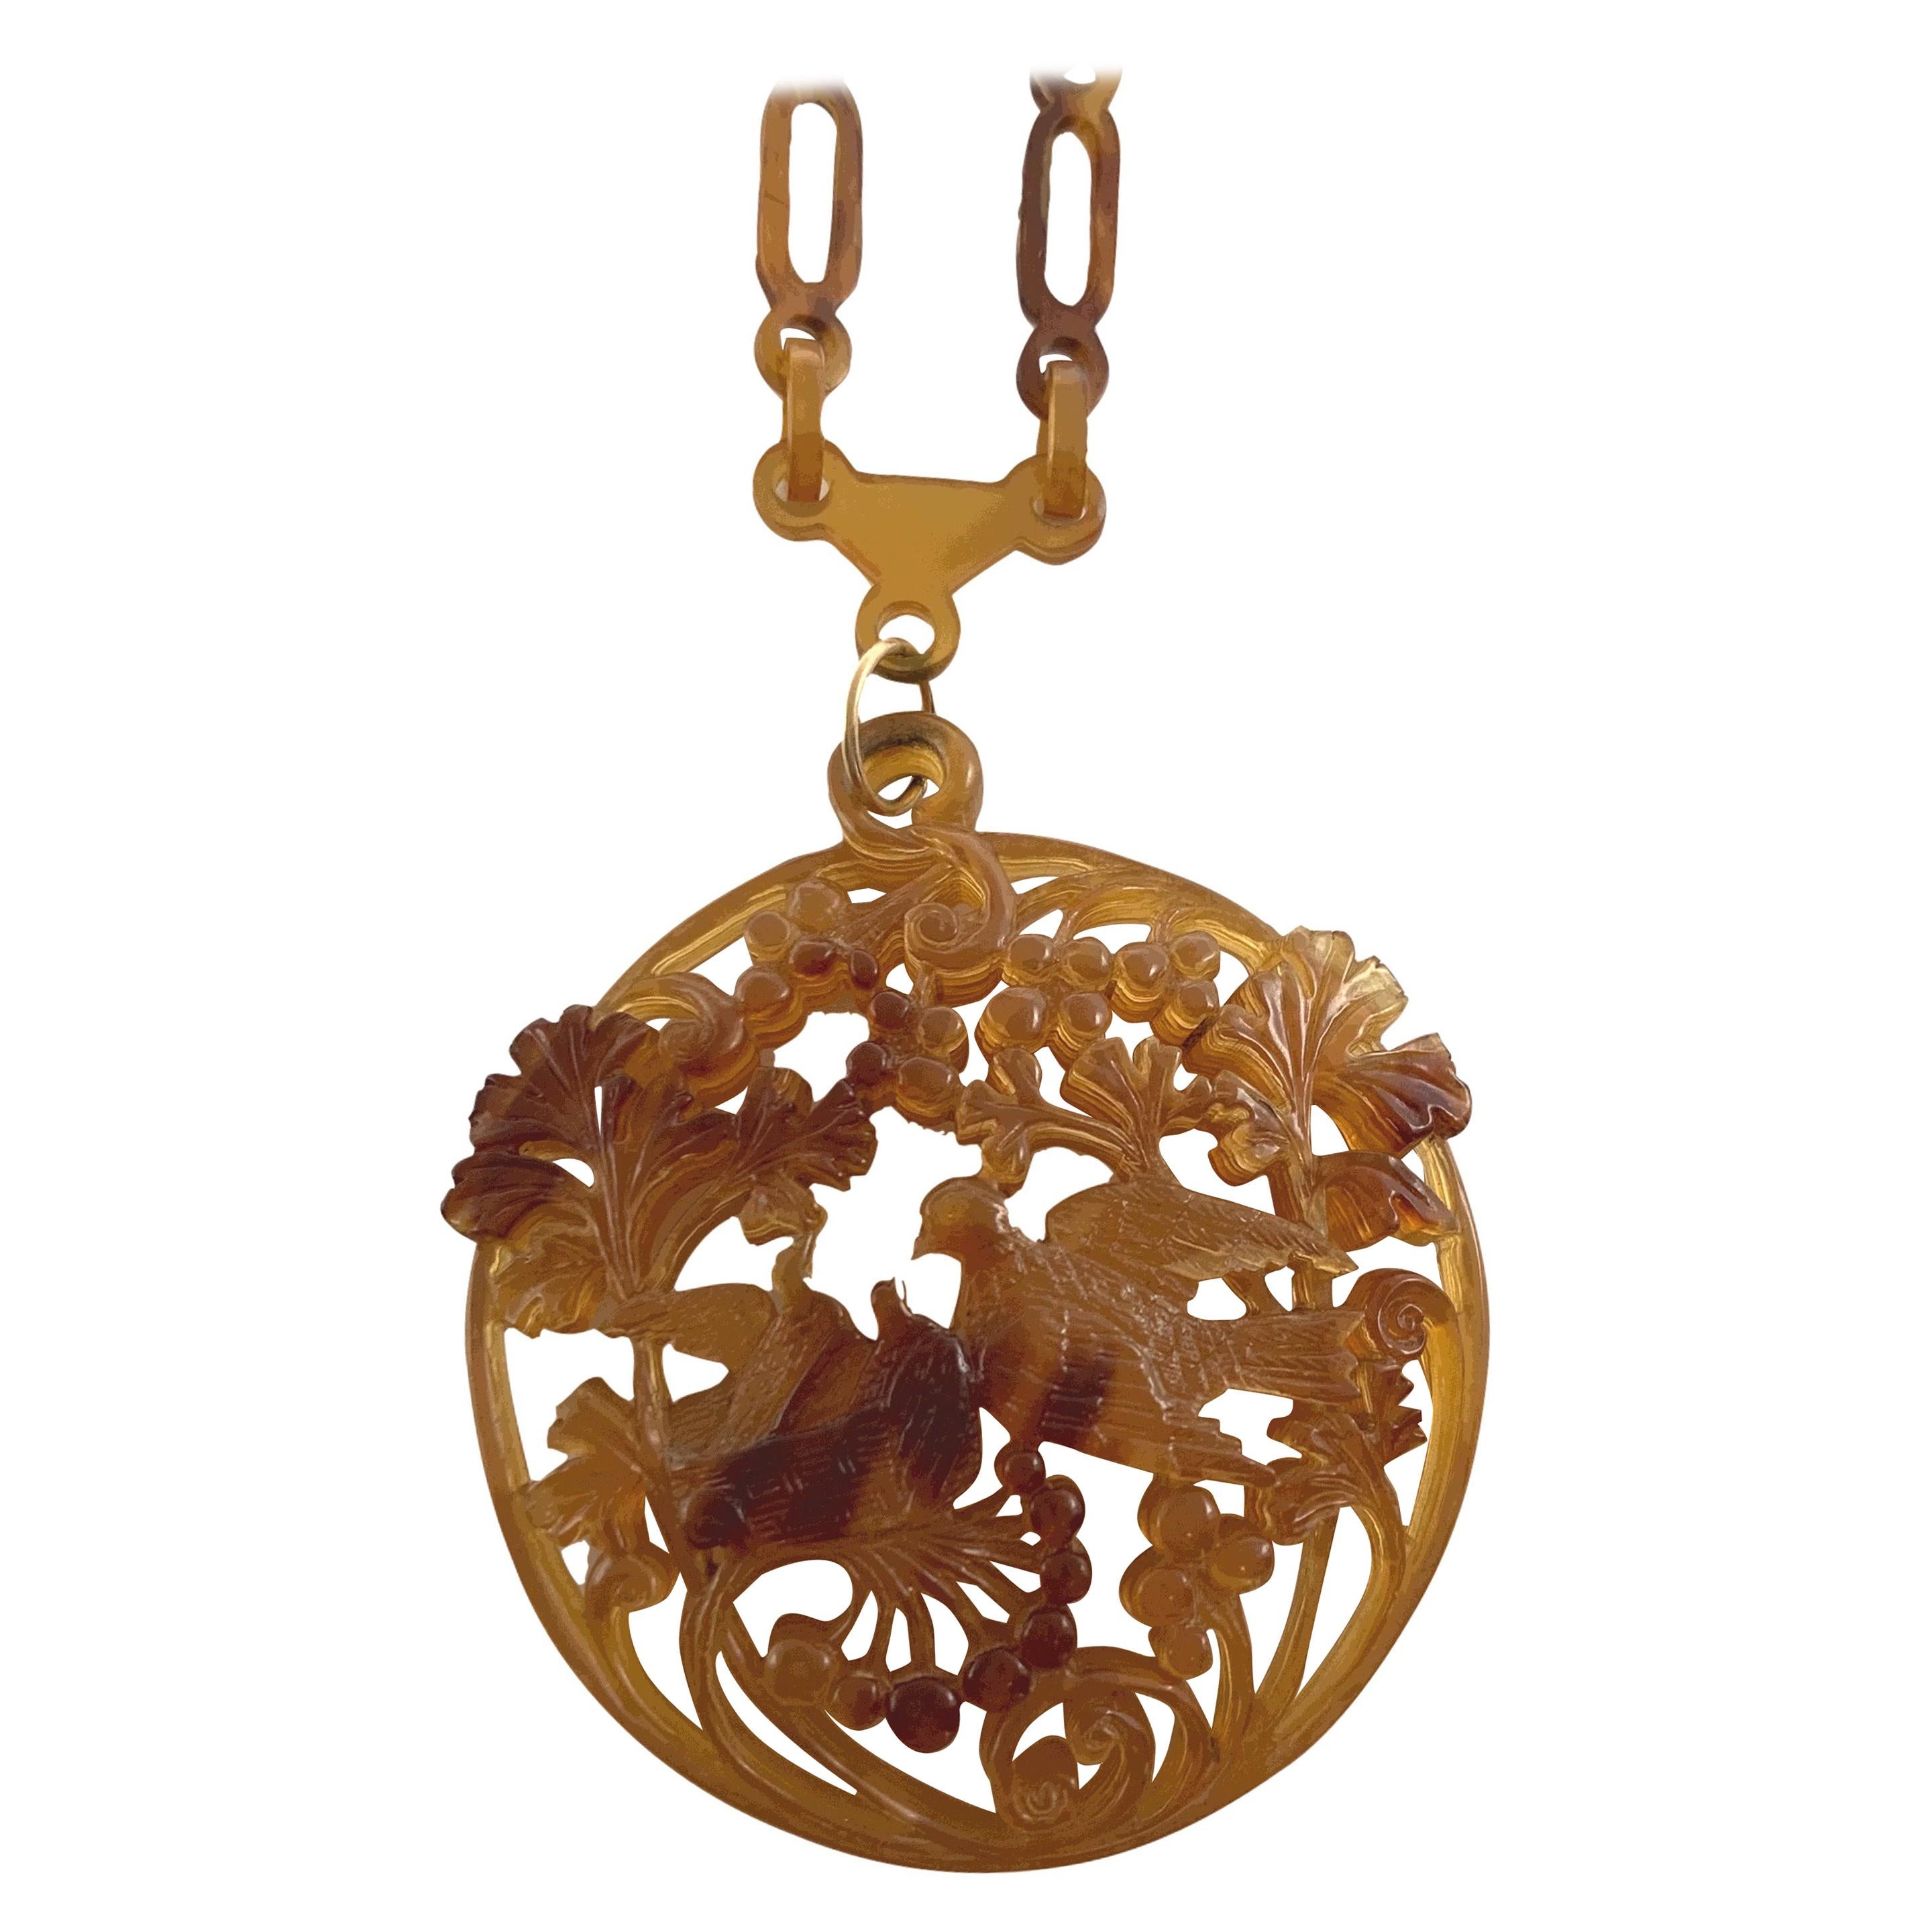 Celluloid CA 1900 14k gold necklace